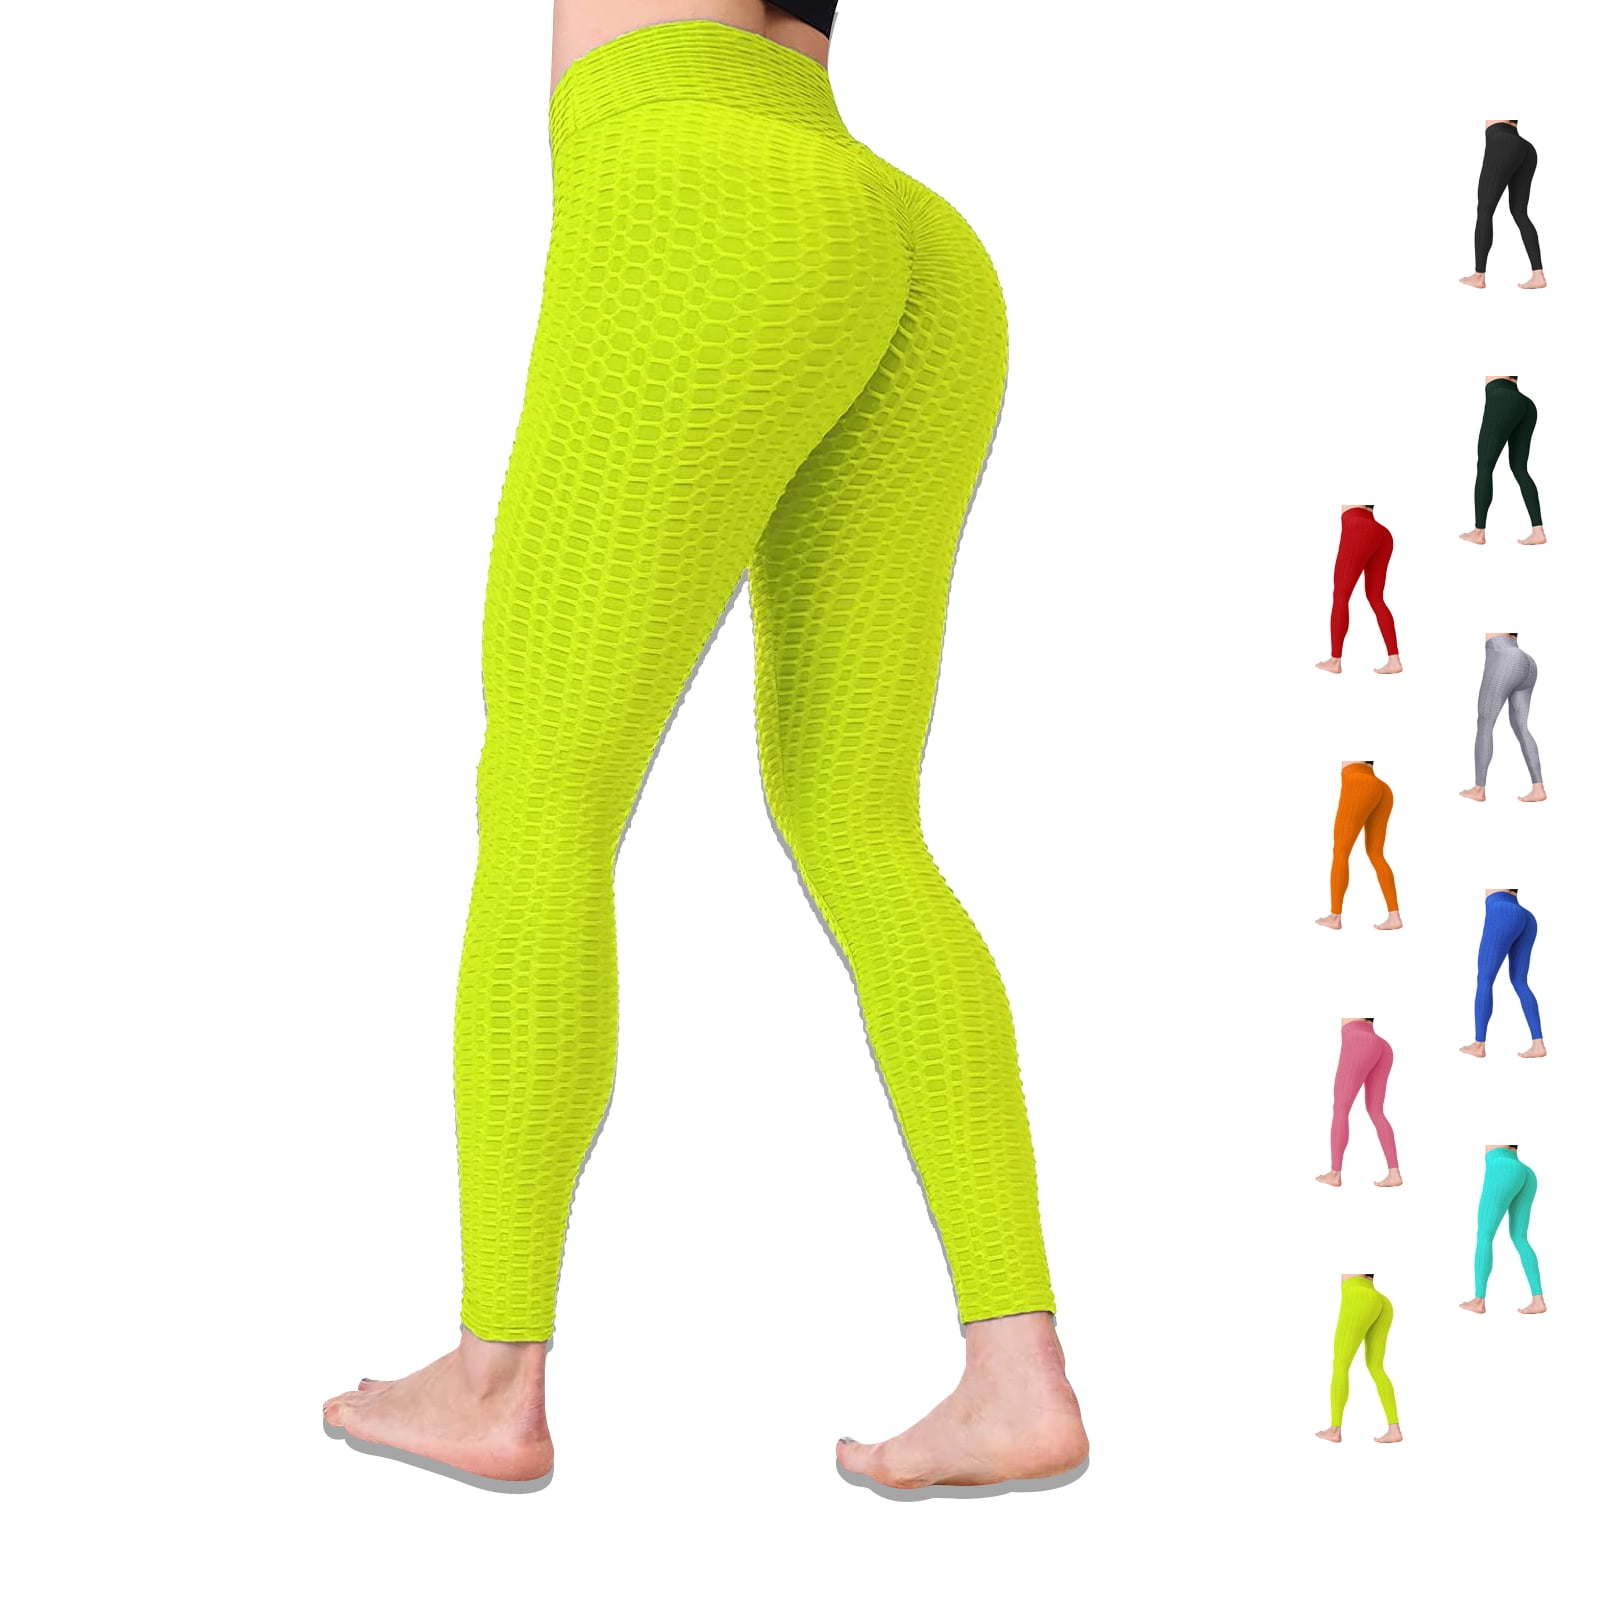 Famous TIK Tok Women's High Waist Yoga Pants Butt Lifting Tummy Control  Leggings Workout Stretchy Lift Tights Seamless A-Army Green : Clothing,  Shoes & Jewelry 